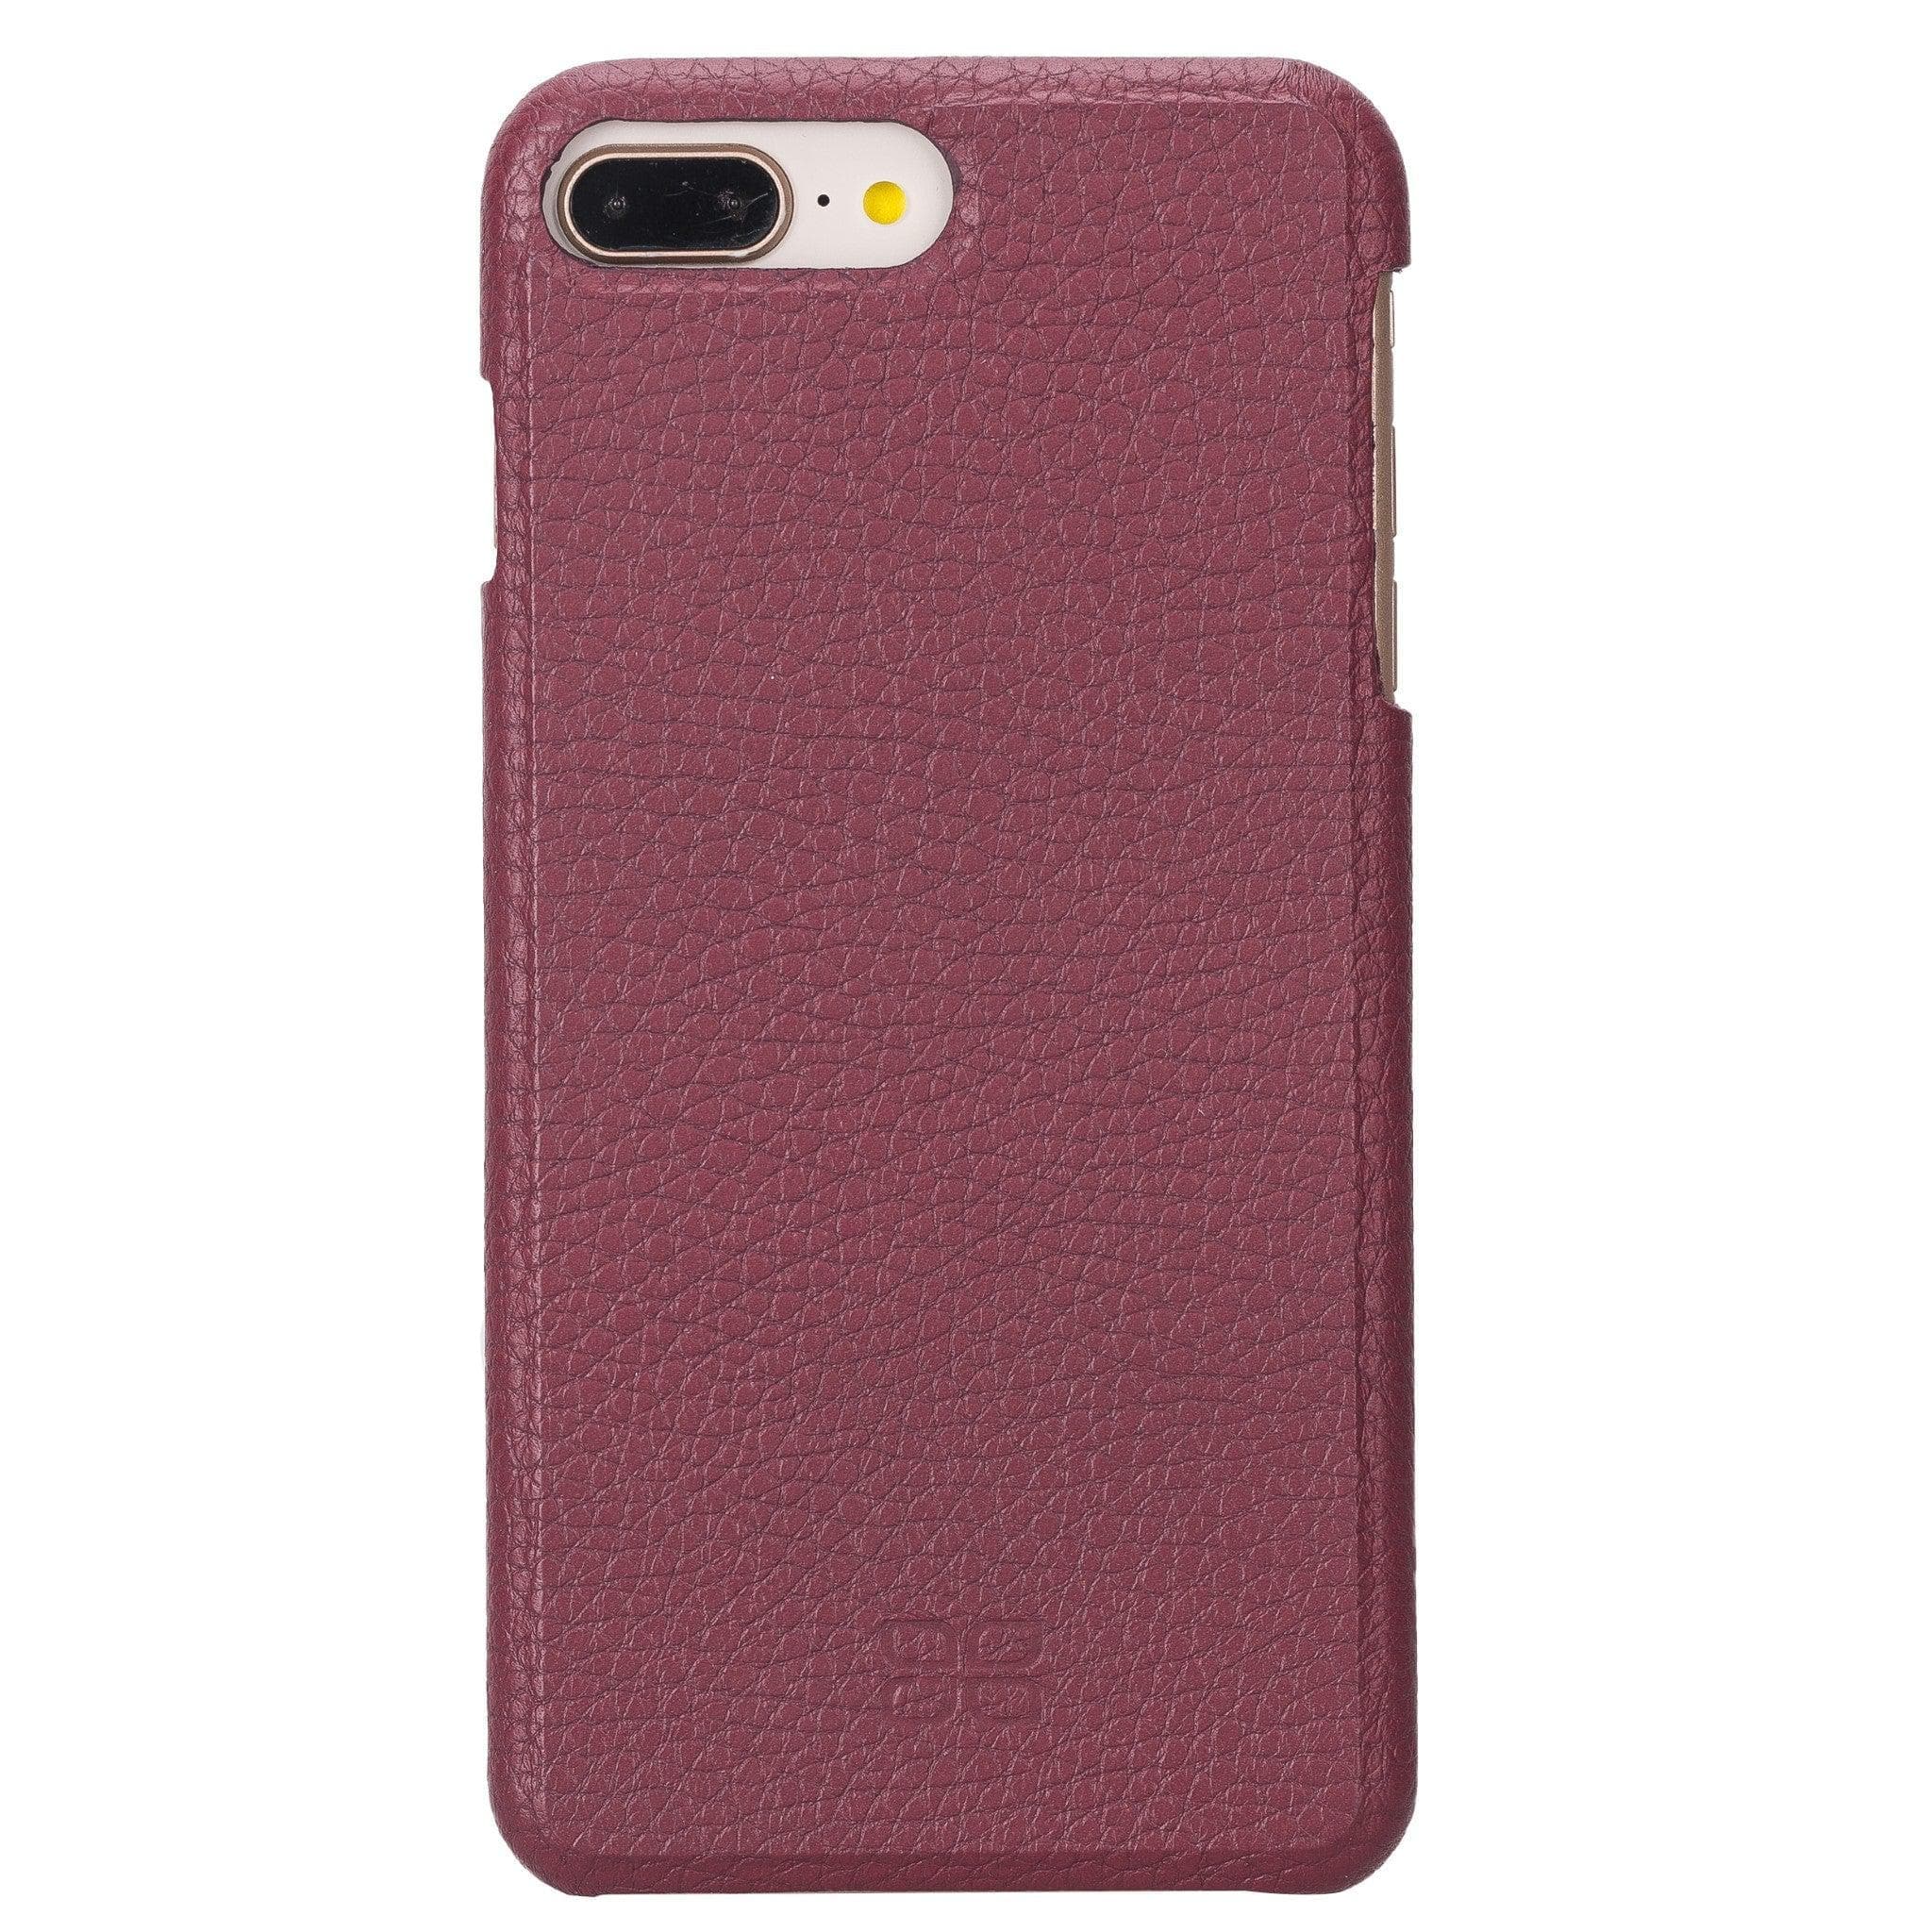 Apple iPhone 8 Series Fully Covering Leather Back Cover Case iPhone 8 / Bordeaux Bouletta LTD